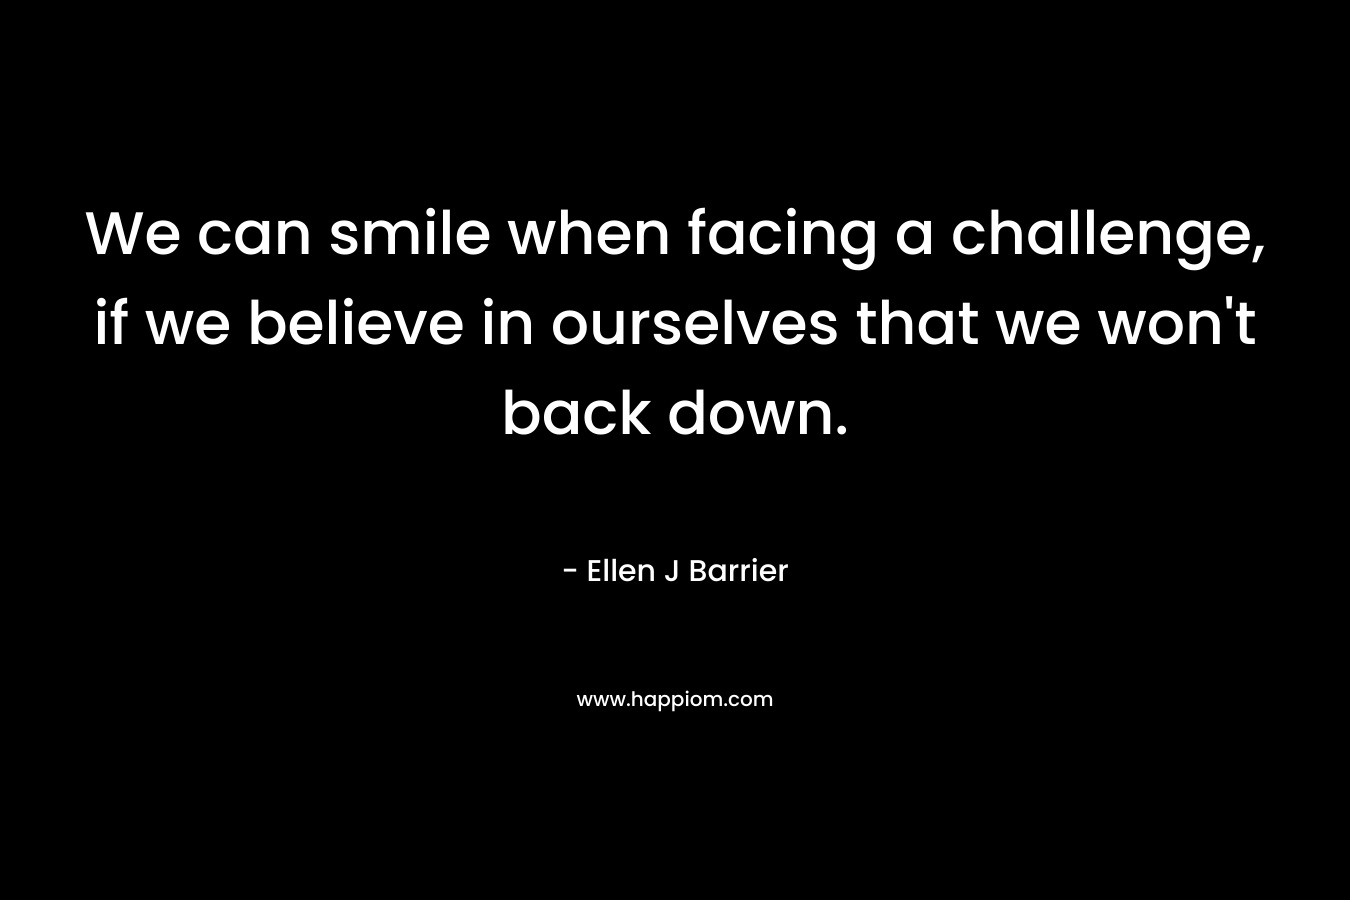 We can smile when facing a challenge, if we believe in ourselves that we won’t back down. – Ellen J Barrier